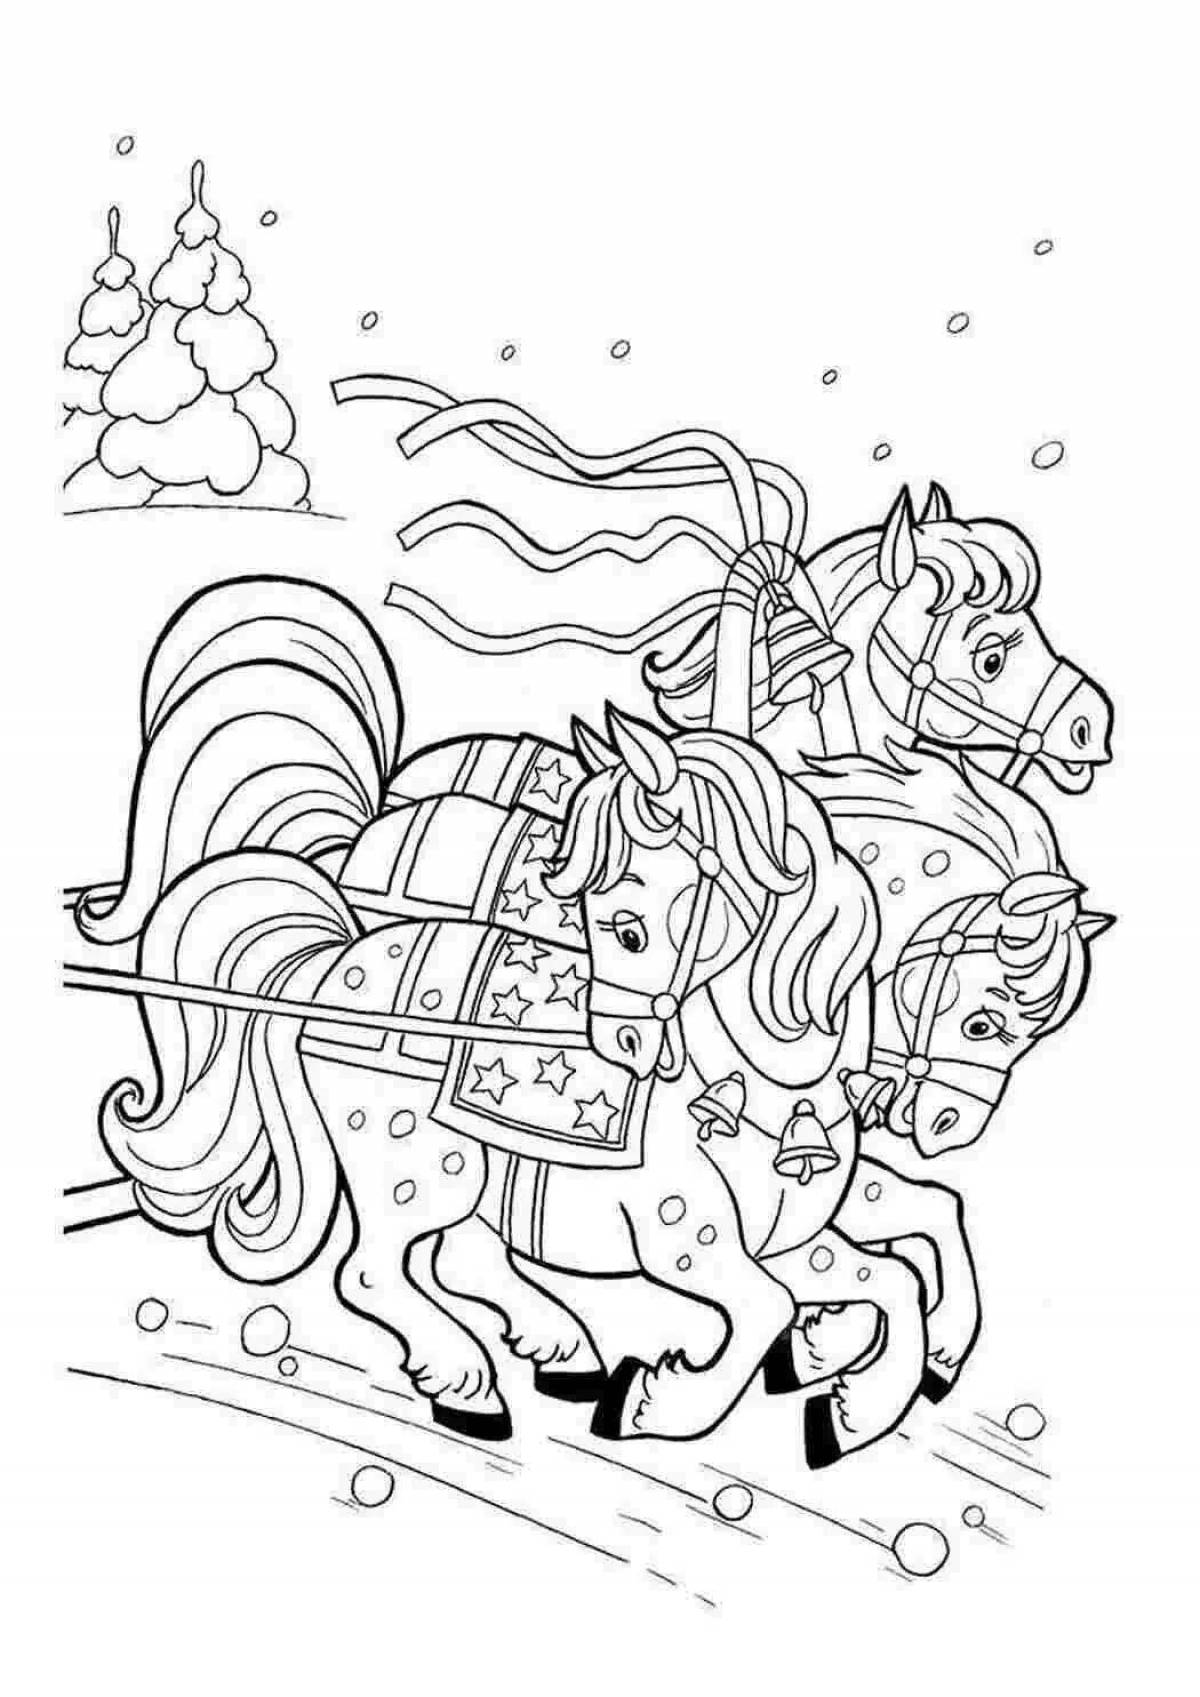 Majestic winter horses coloring page